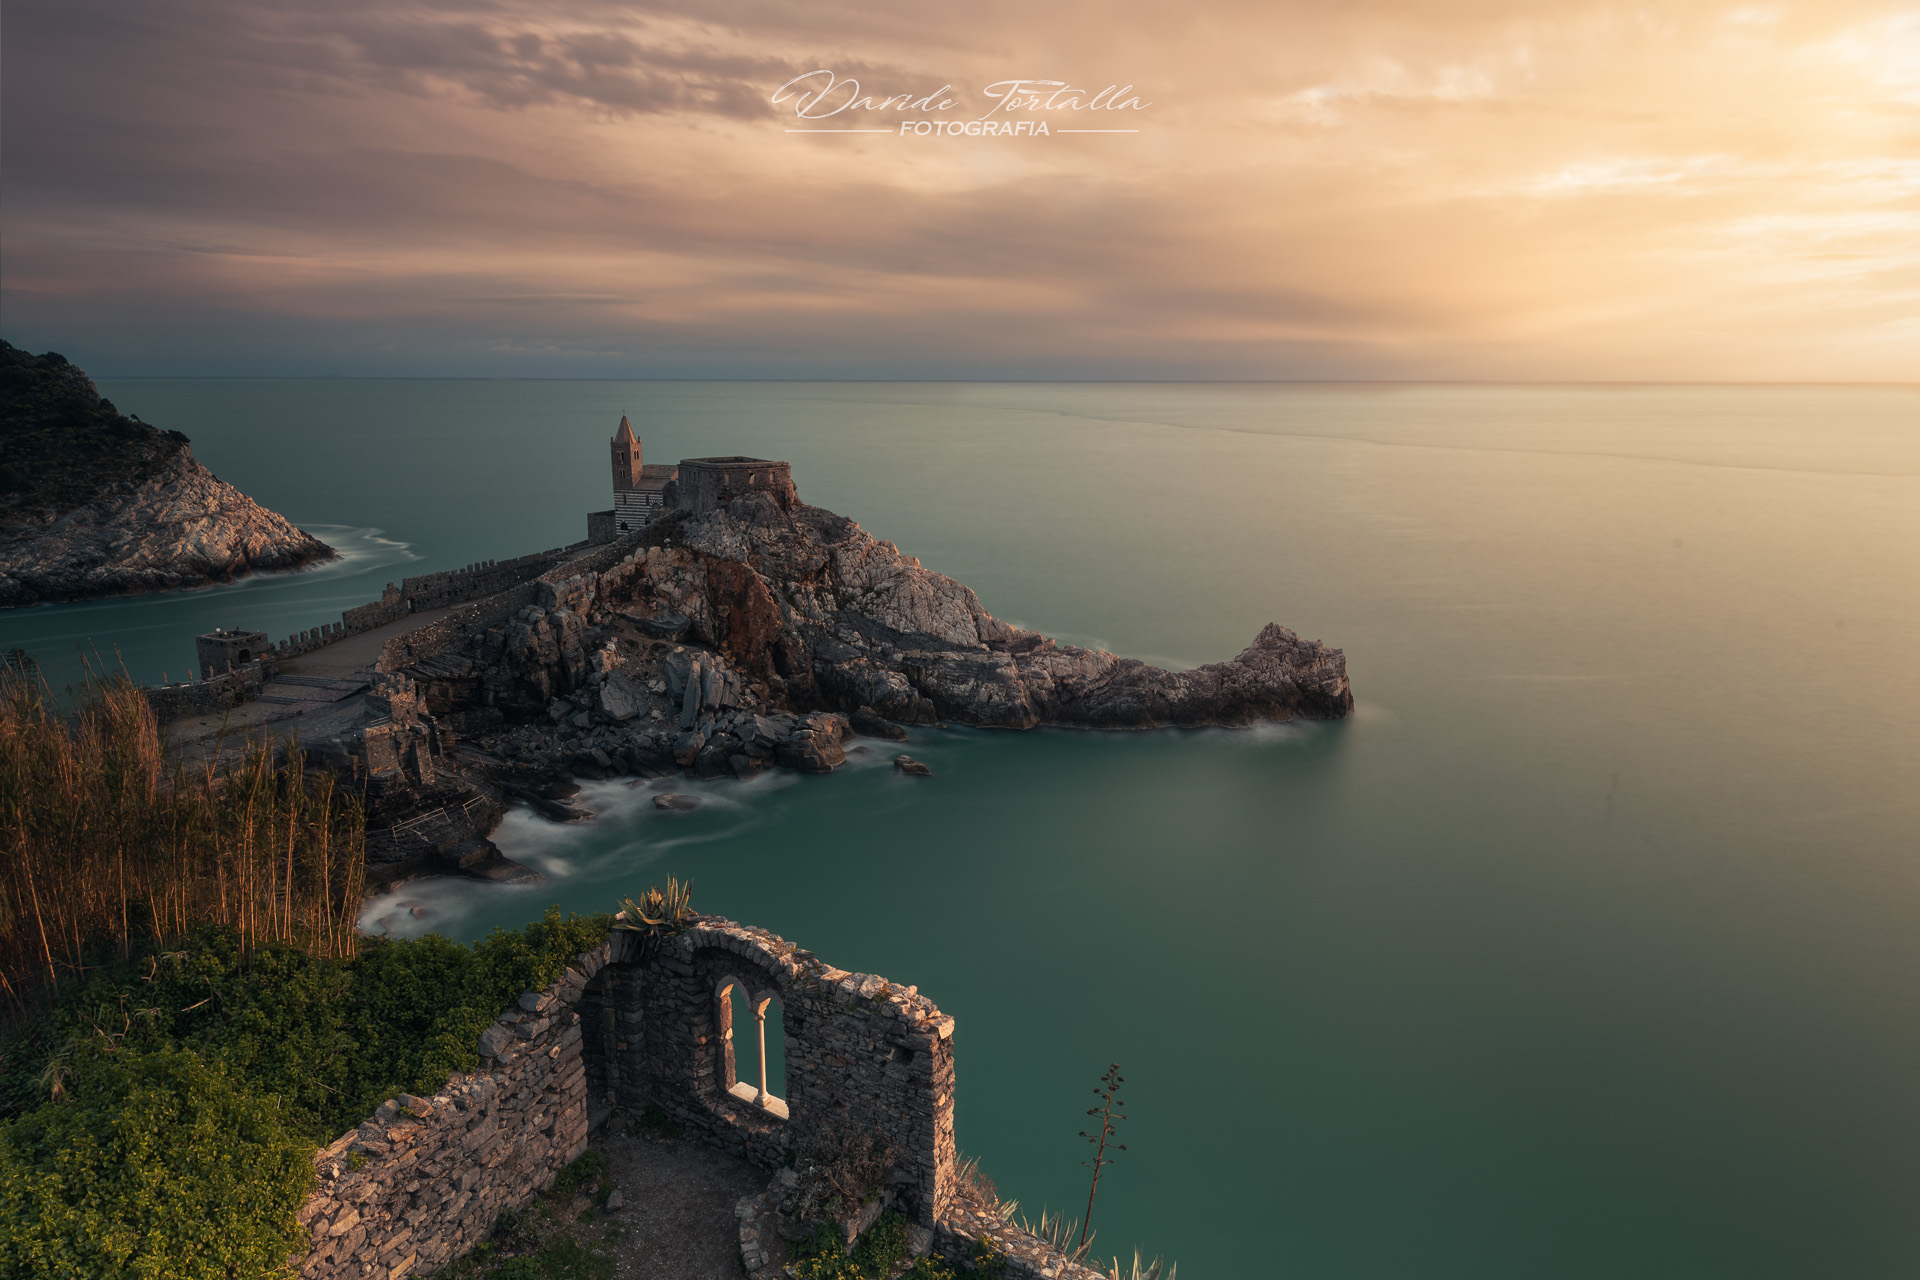 Portovenere - the sixth of the 5 lands...